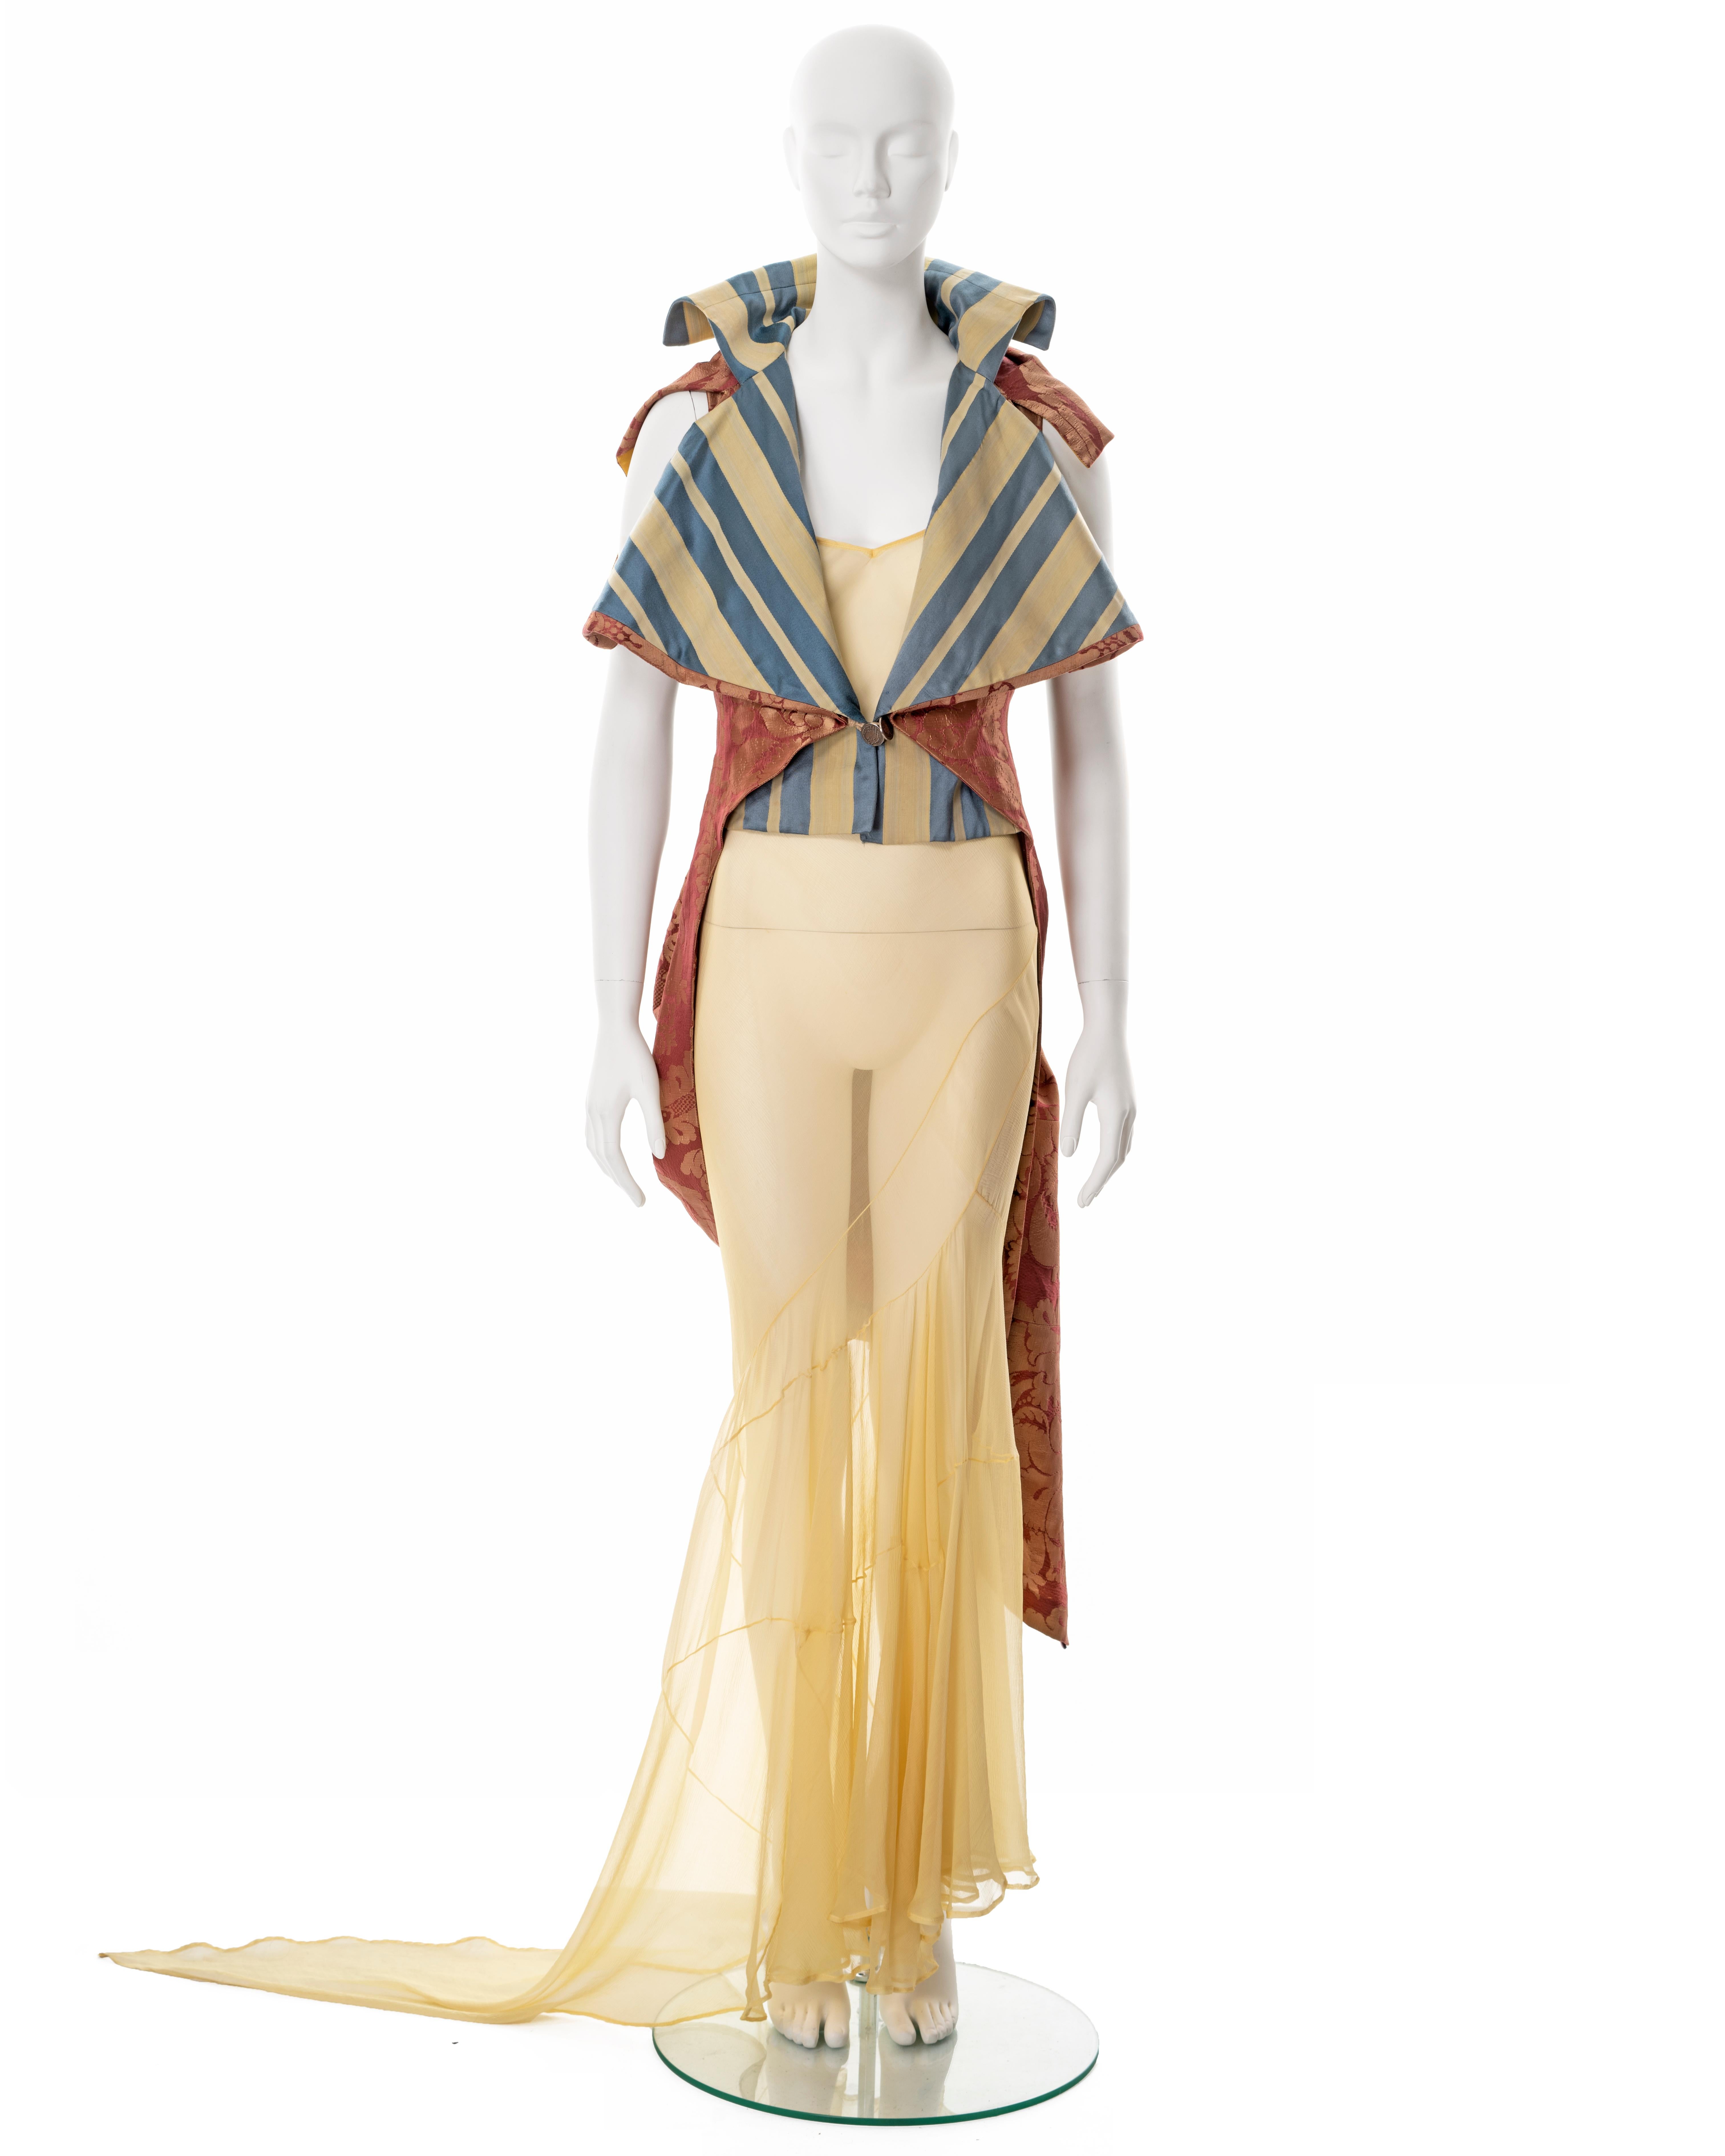 ▪ John Galliano 'Filibuster' runway ensemble 
▪ Sold by One of a Kind Archive
▪ Spring-Summer 1993
▪ Museum piece
▪ Sleeveless tailcoat constructed from furnishing-weight amber Rubelli silk damask and pale yellow and blue striped satin
▪ Back panel